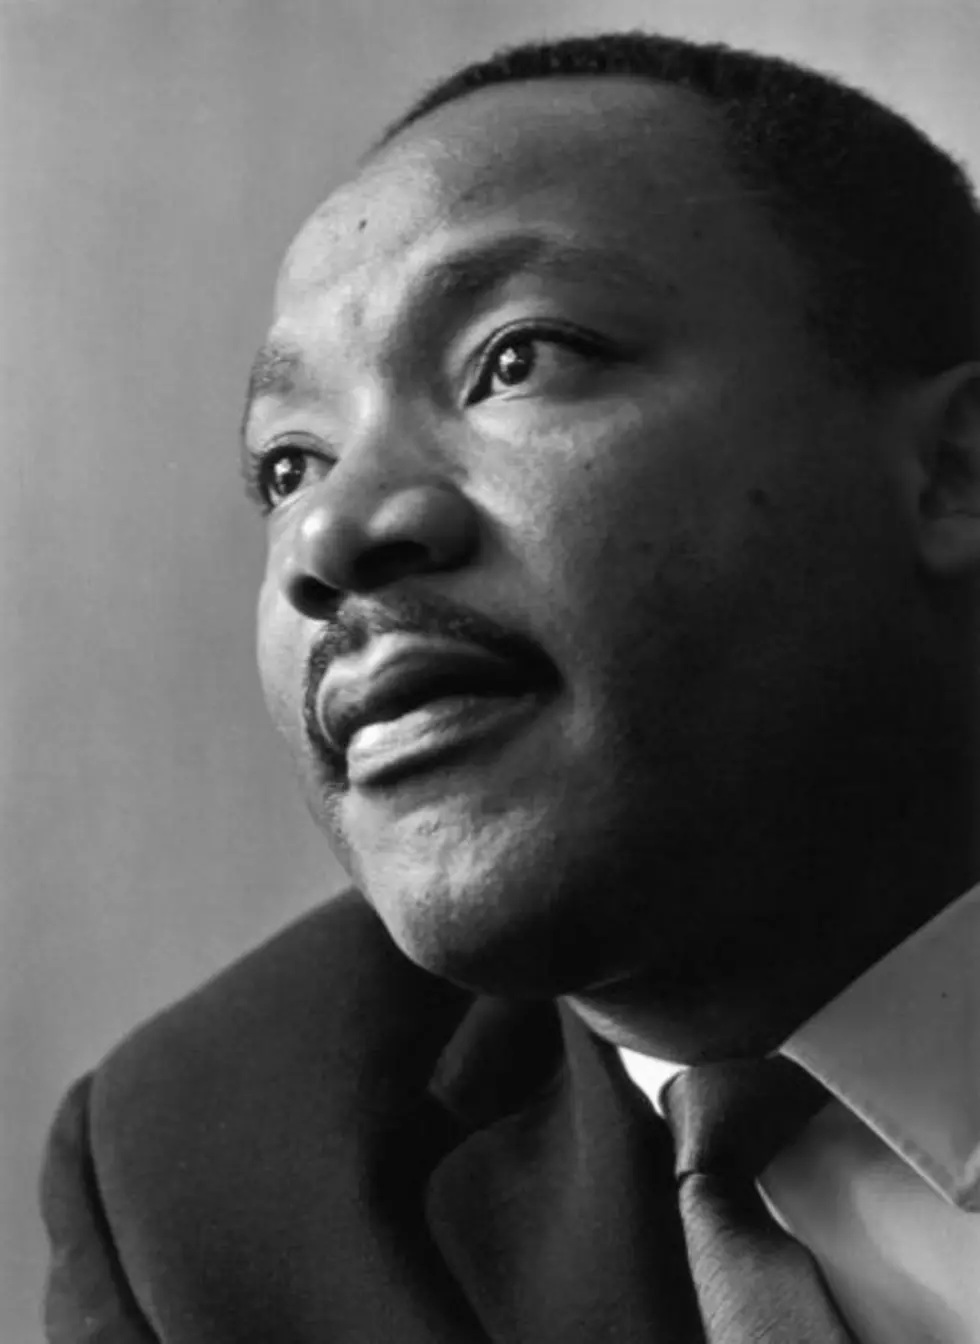 Demetrius Minor, Dr. Martin Luther King’s Legacy and Lessons Praised By Black Conservative